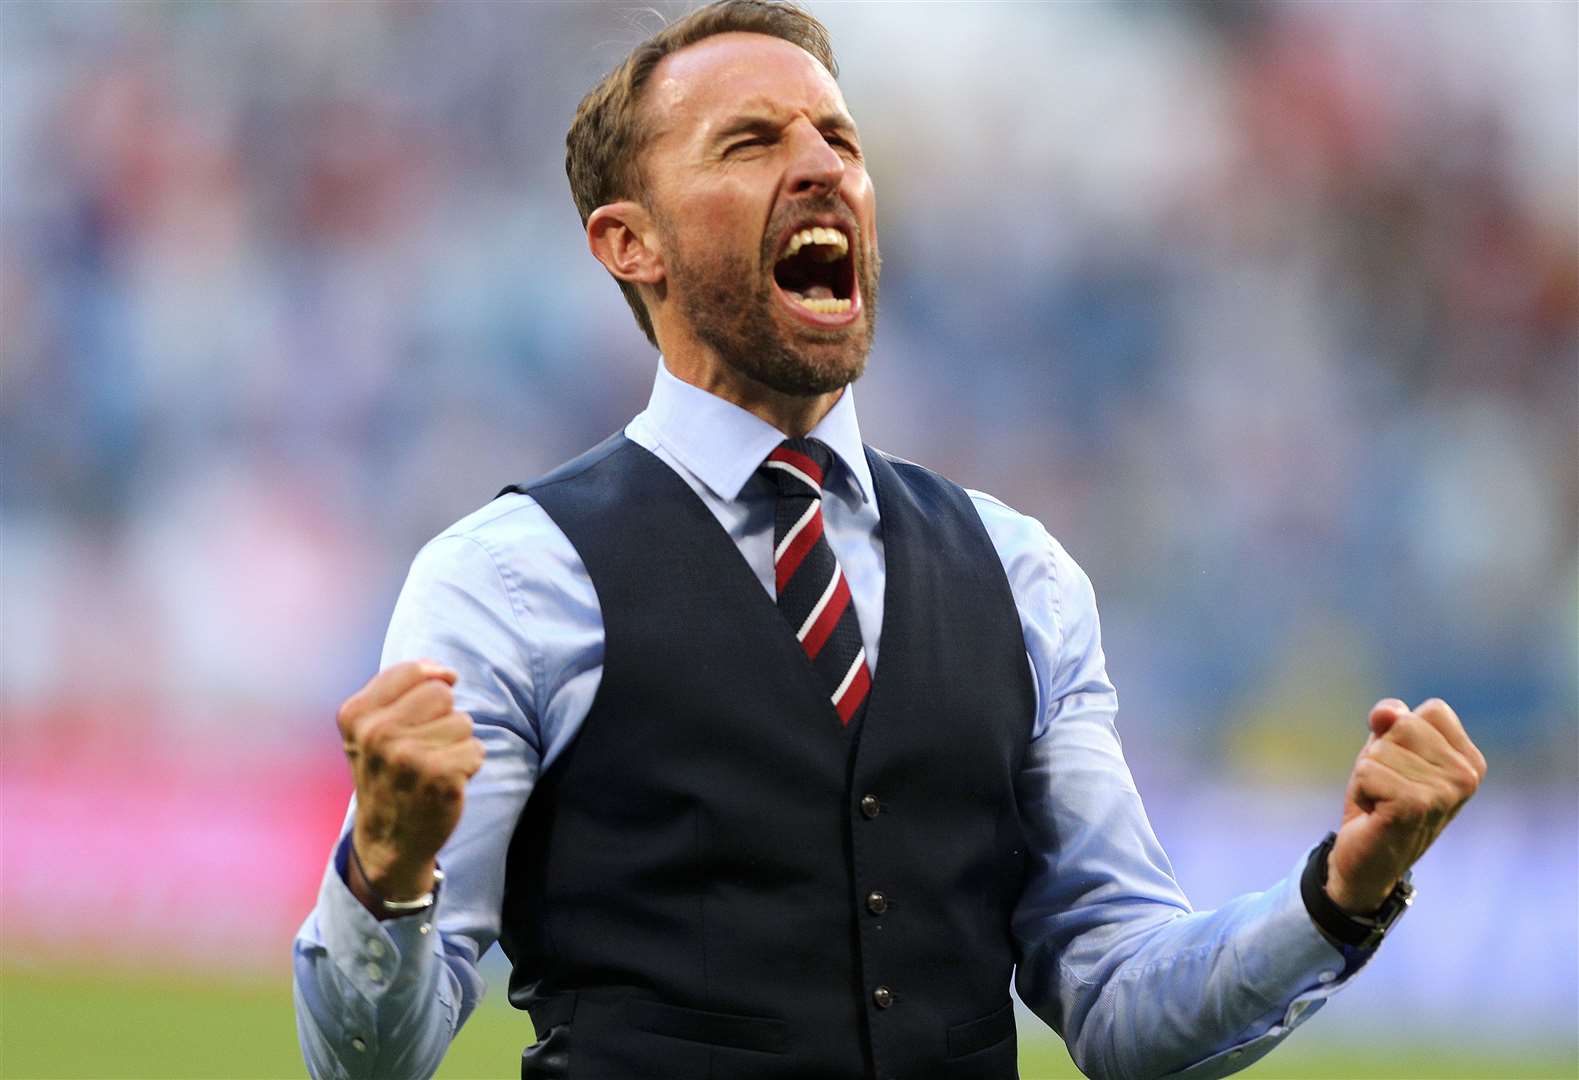 Could Gareth Southgate unite the country? Picture: PA